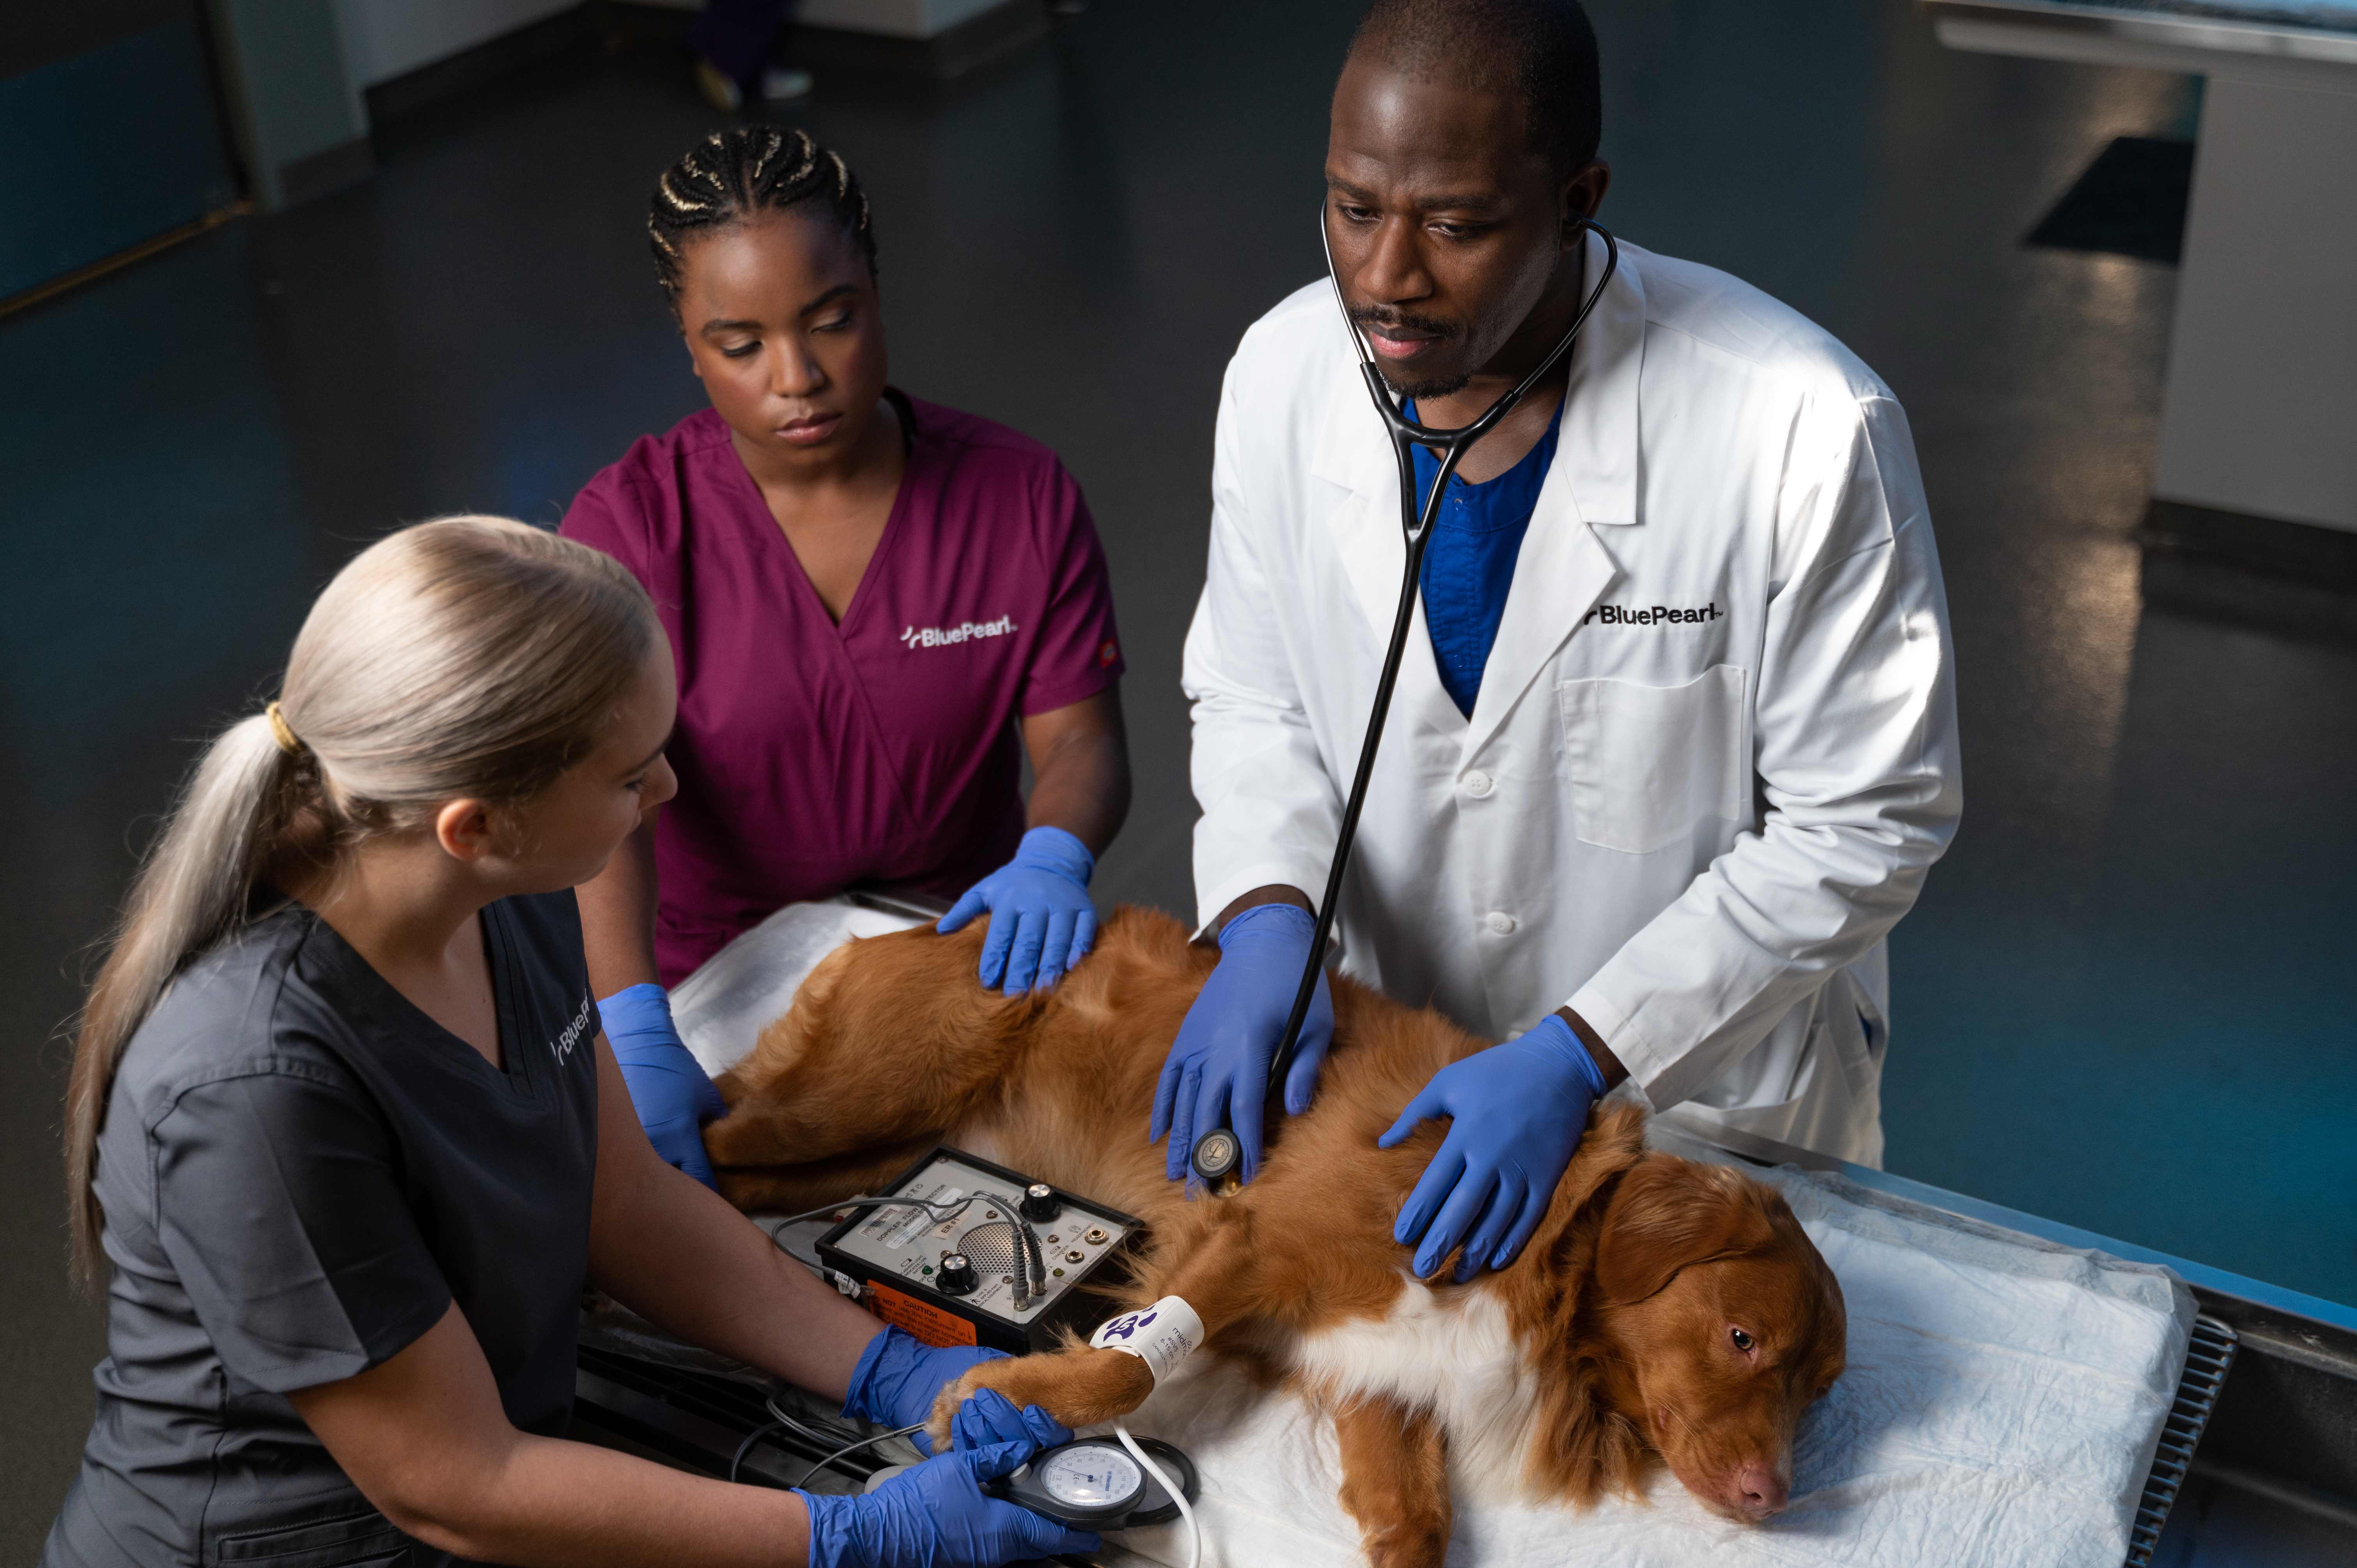 A veterinarian examines a dog while two technicians in scrubs assist.